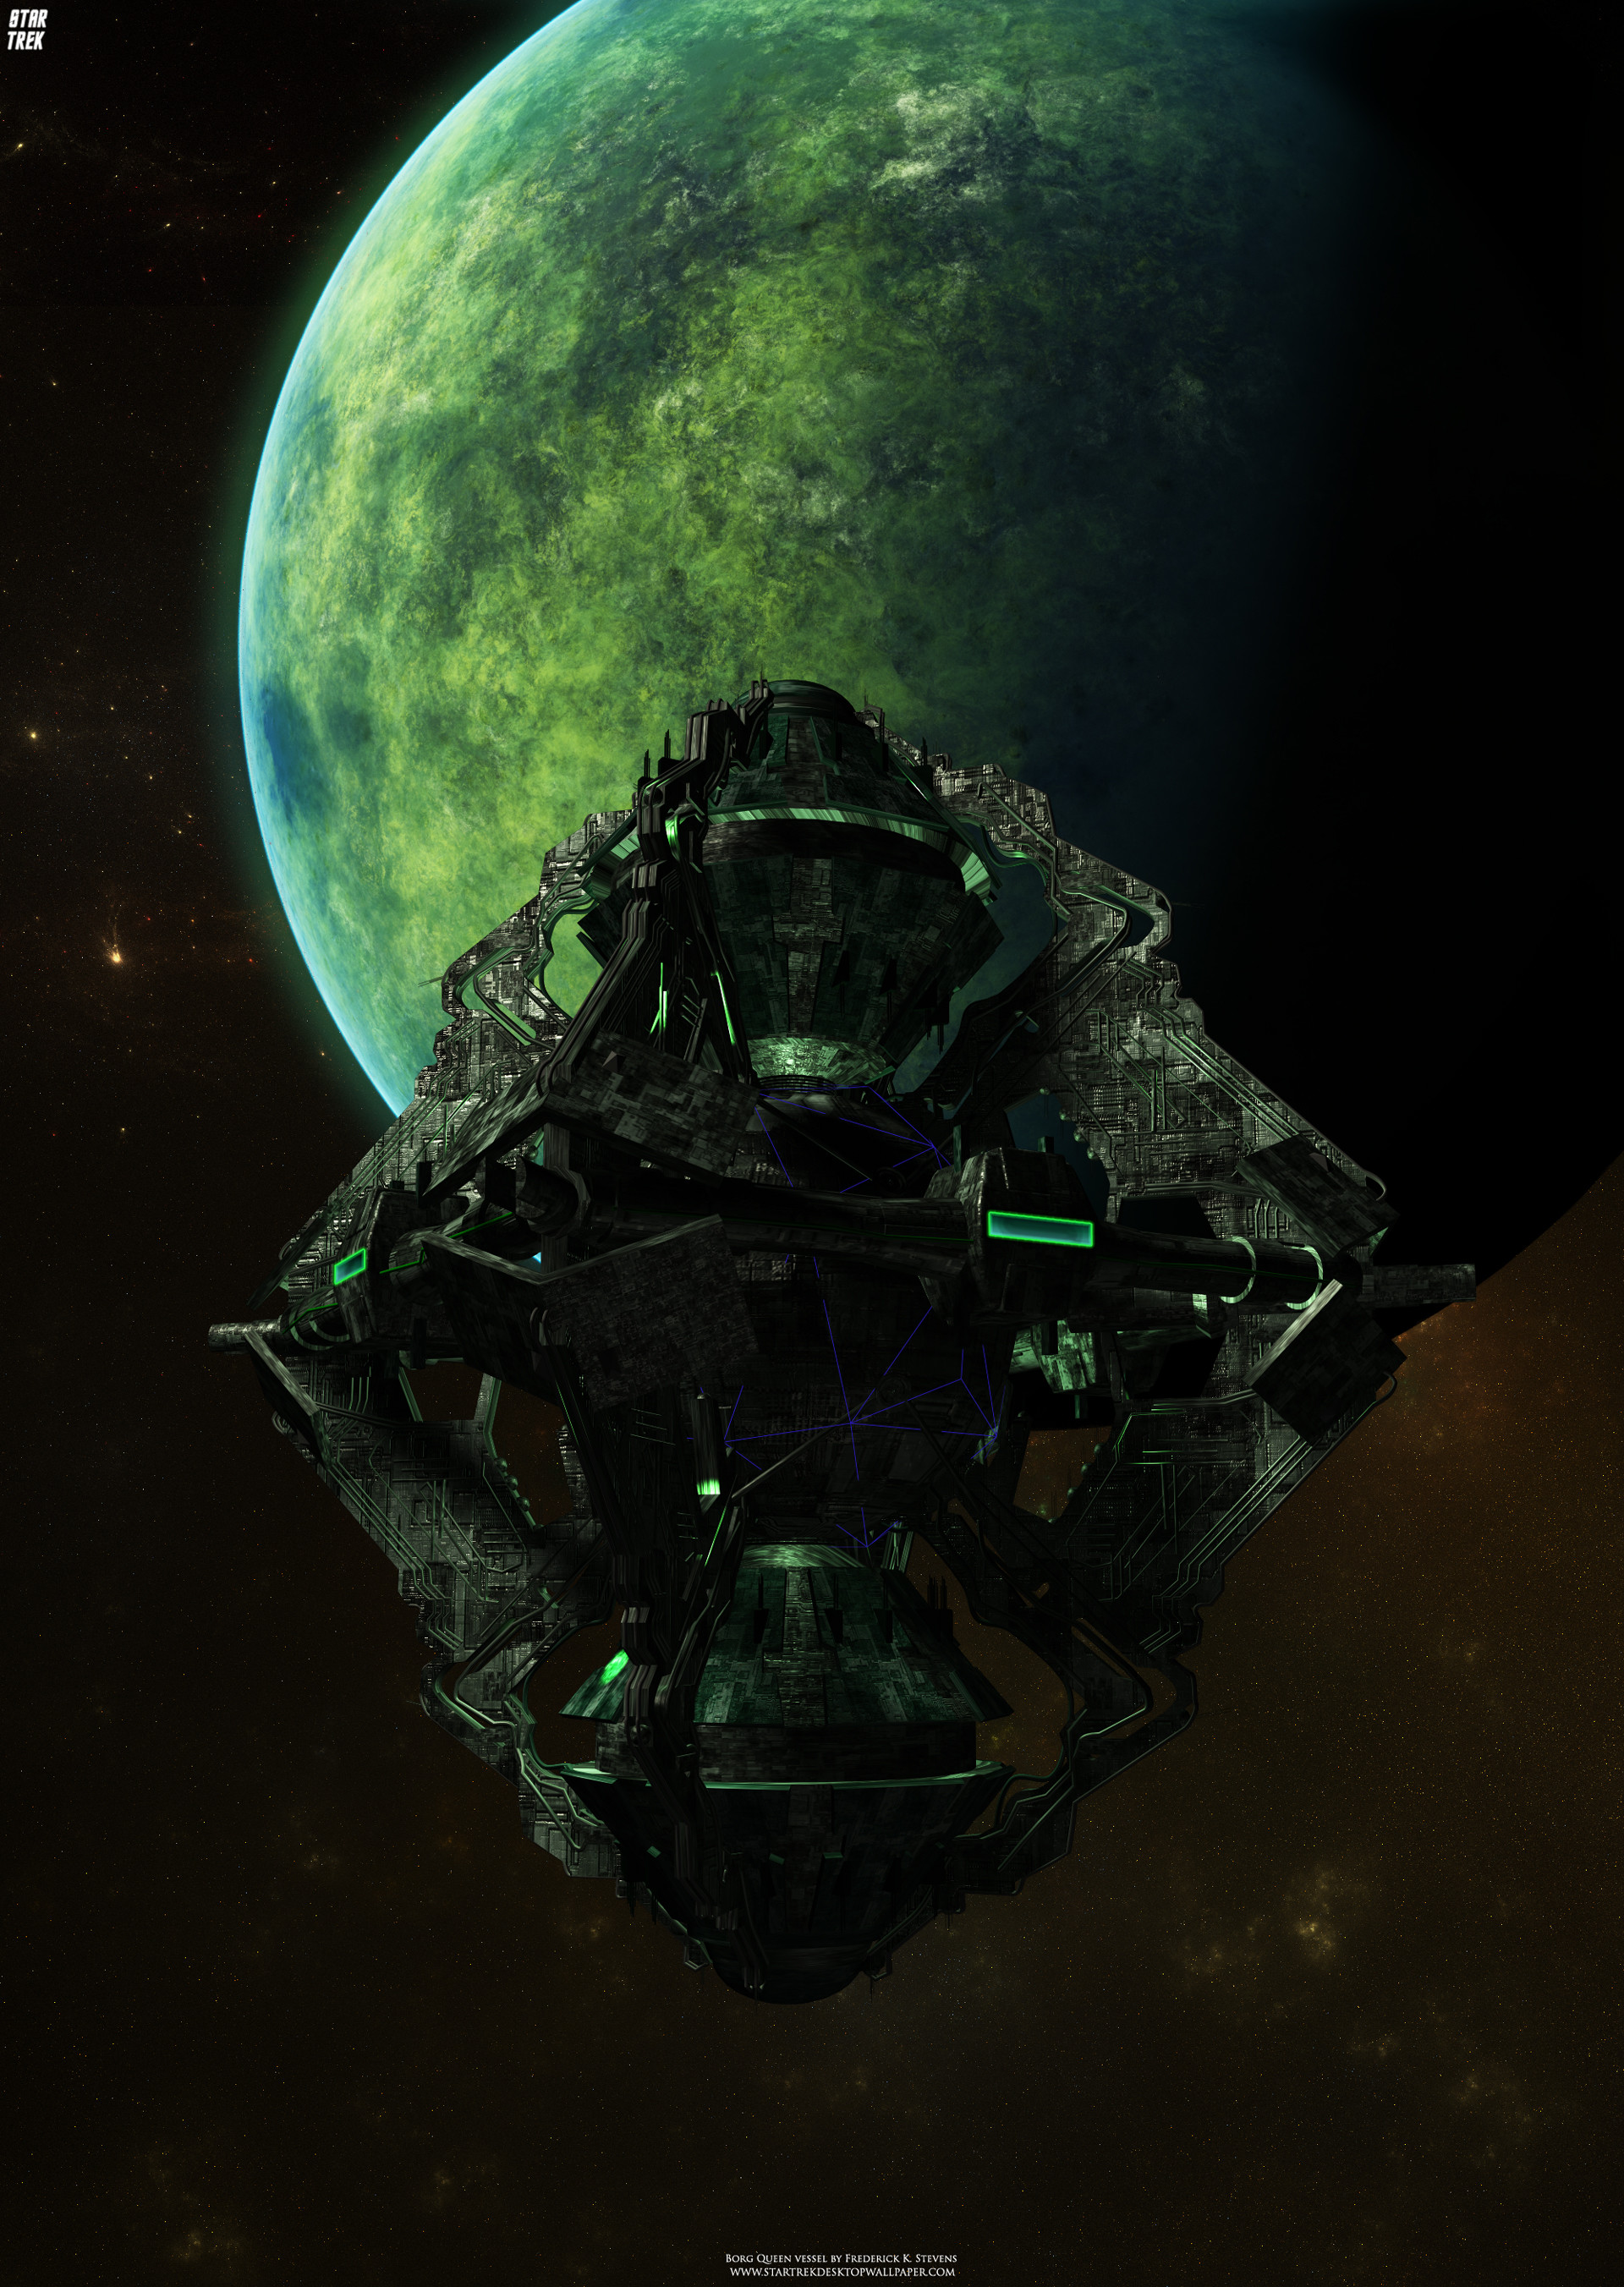 borg wallpaper,astronomical object,space,planet,earth,outer space